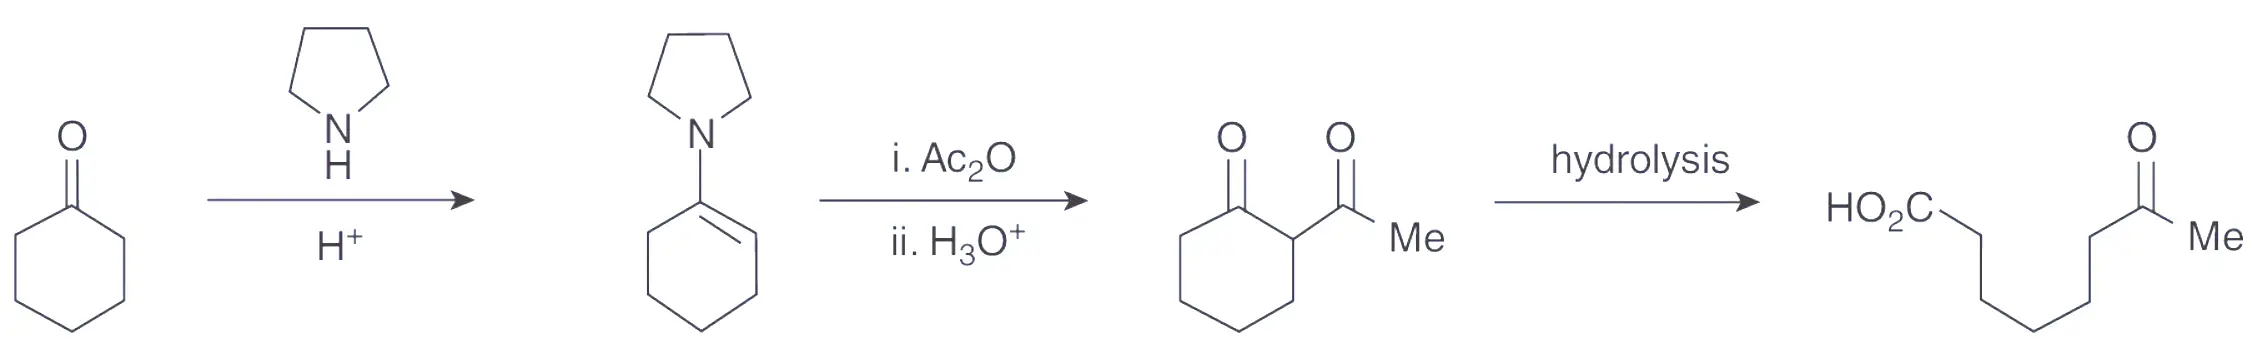 Preparation of pyrrolidine enamine and acetylation from cyclohexanone